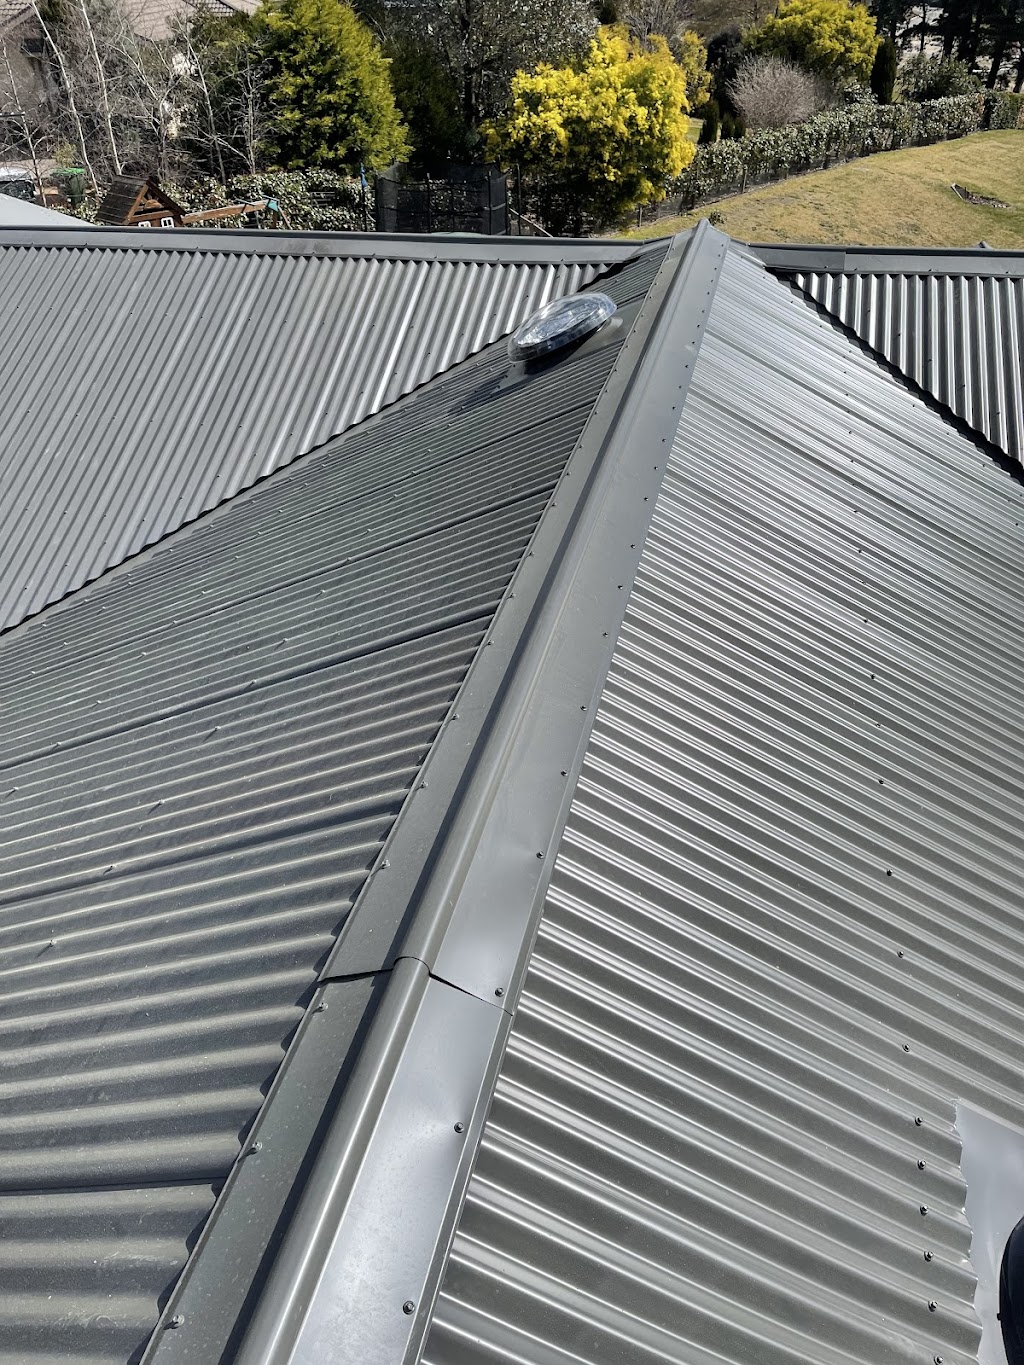 Rm roof services | 4 Amber Pl, Bomaderry NSW 2541, Australia | Phone: 0423 558 755